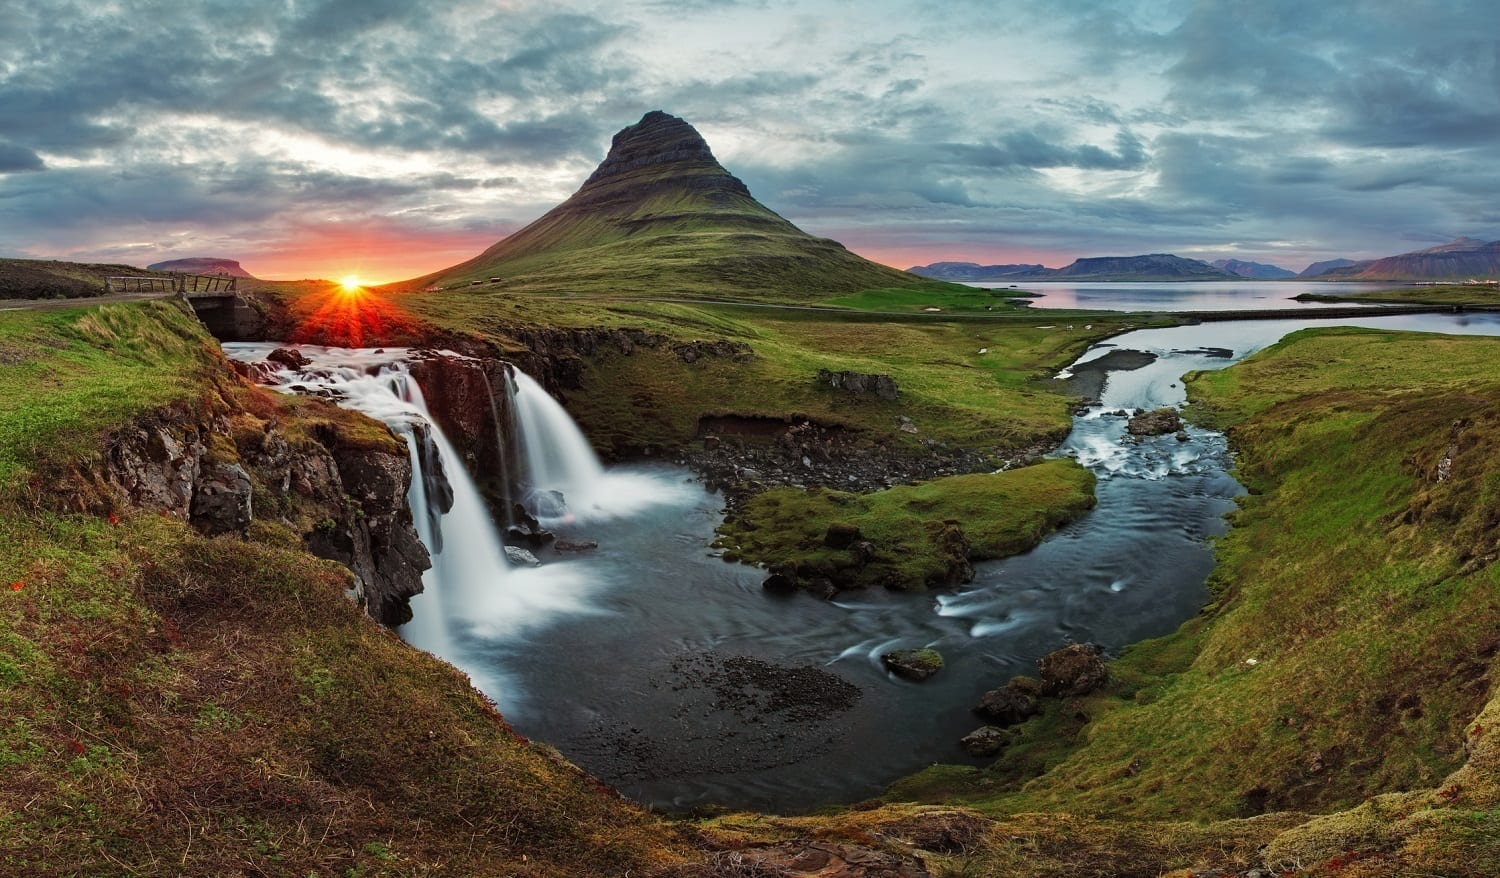 Iceland waterfall, mountain, sunset: ID 31731187 © Tomas1111 | Dreamstime.com